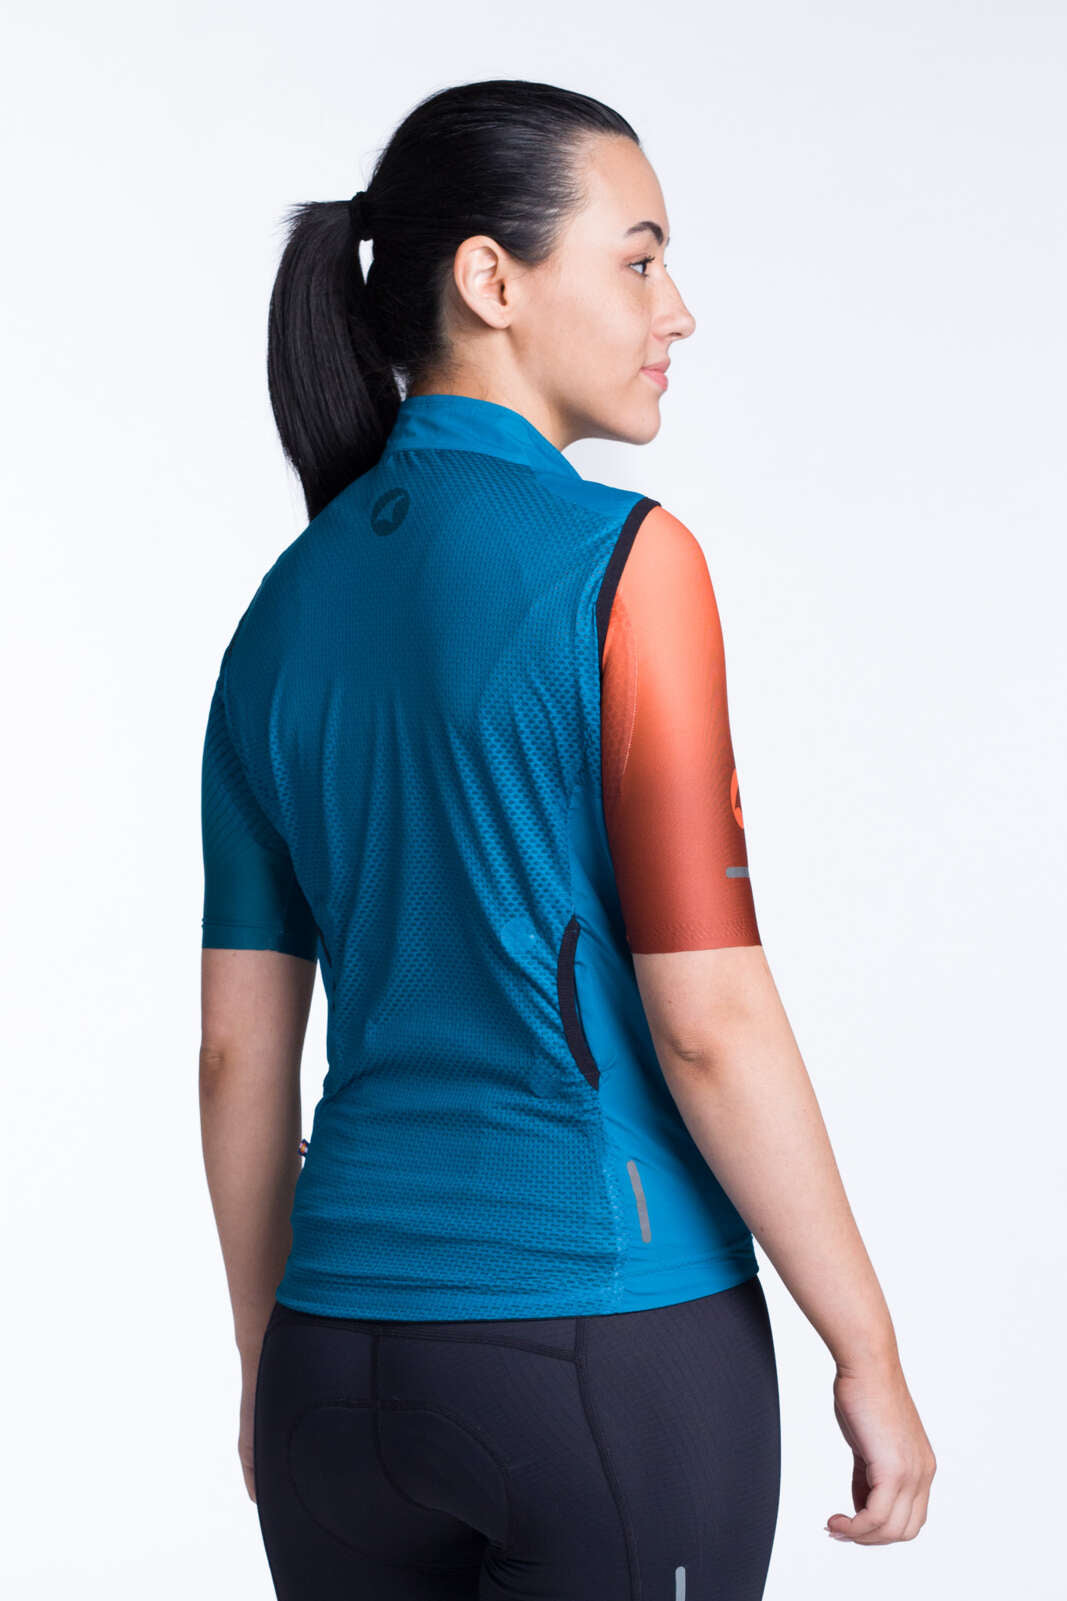 Women's Teal Packable Cycling Wind Vest - Back View